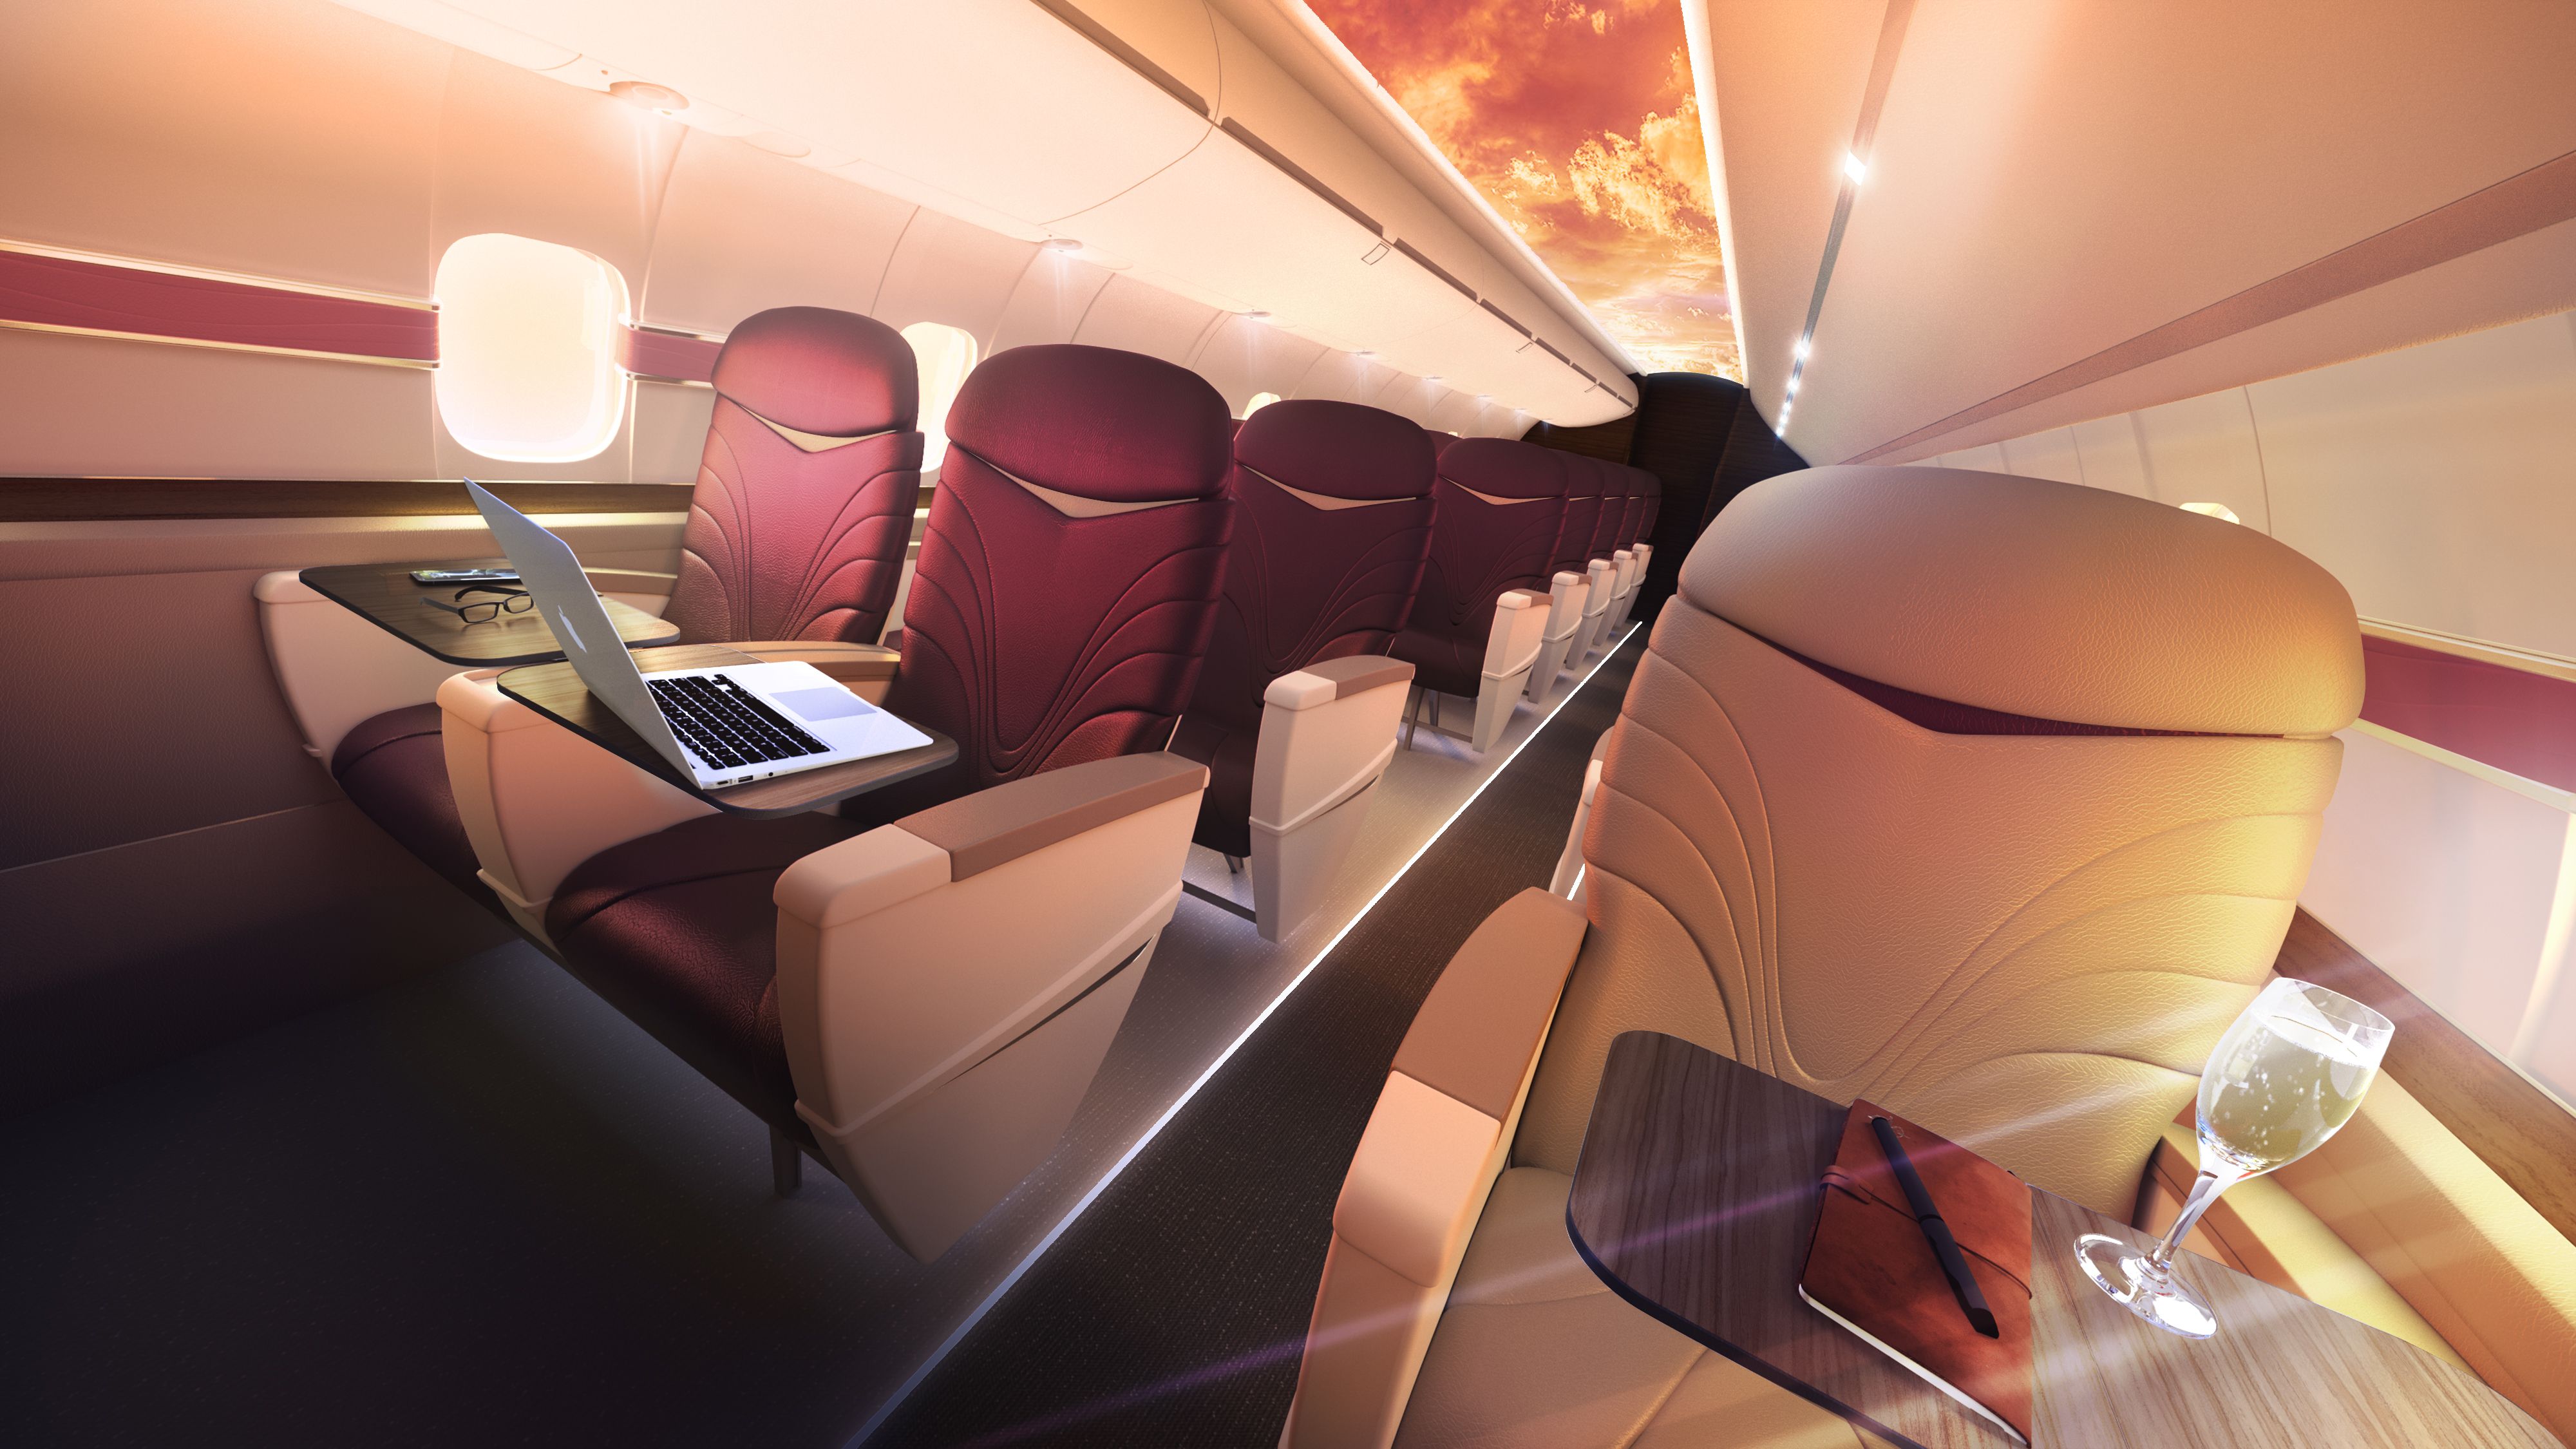 The FIRST aft-cabin (21 seats) features the widest seats with the most leg-room of any domestic first-class service in the United States.